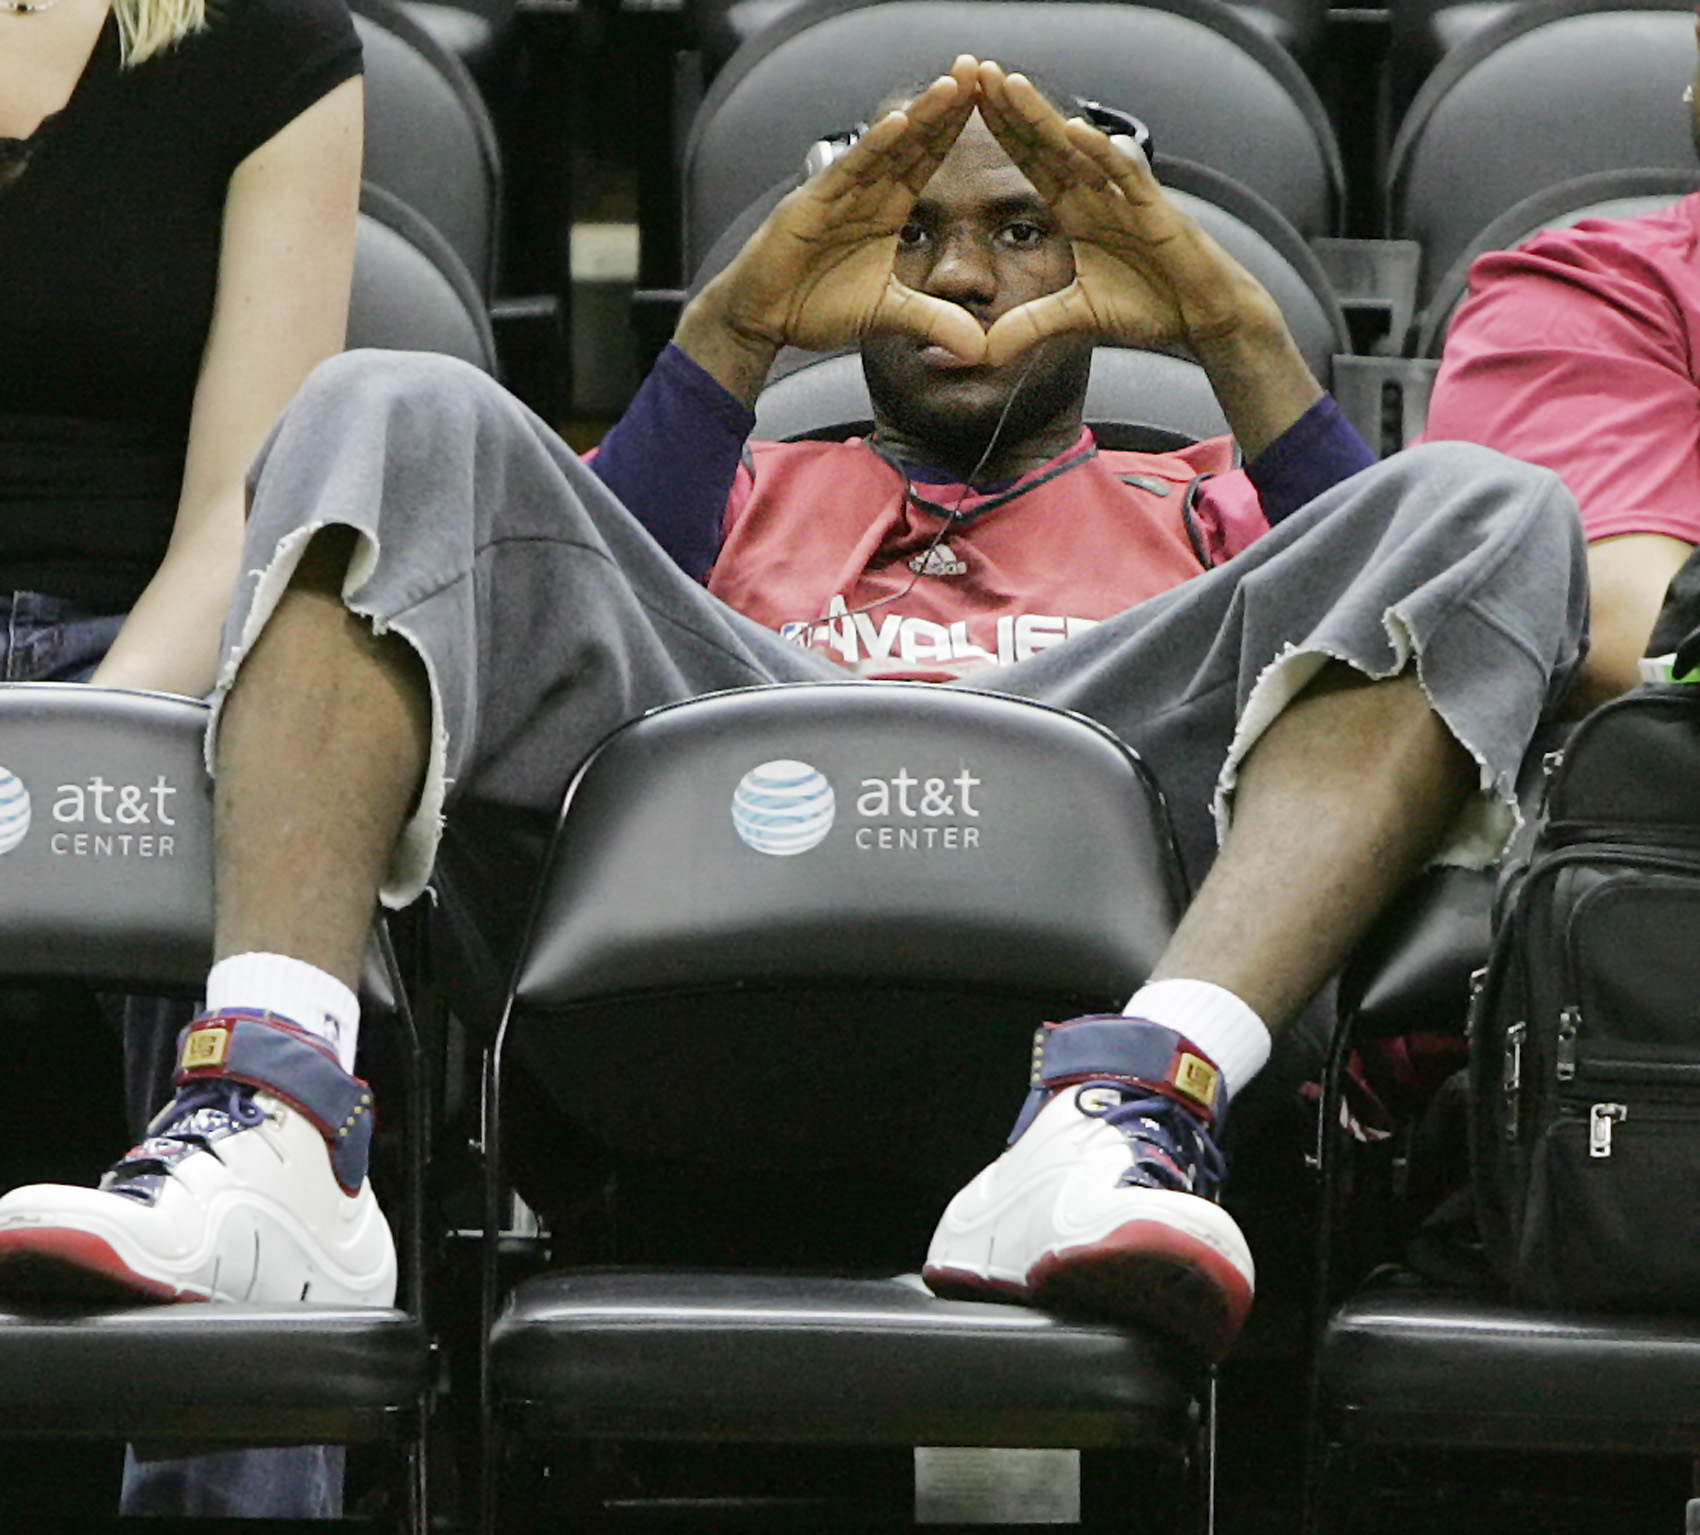 Cleveland Cavaliers LeBron James looks at the press across court through his hands before a practice session June 8, 2007 at the AT T Center in San Antonio, Texas in preparation for game 2 of the NBA Finals against the San Antonio Spurs.  (John Kuntz/The Plain Dealer) 